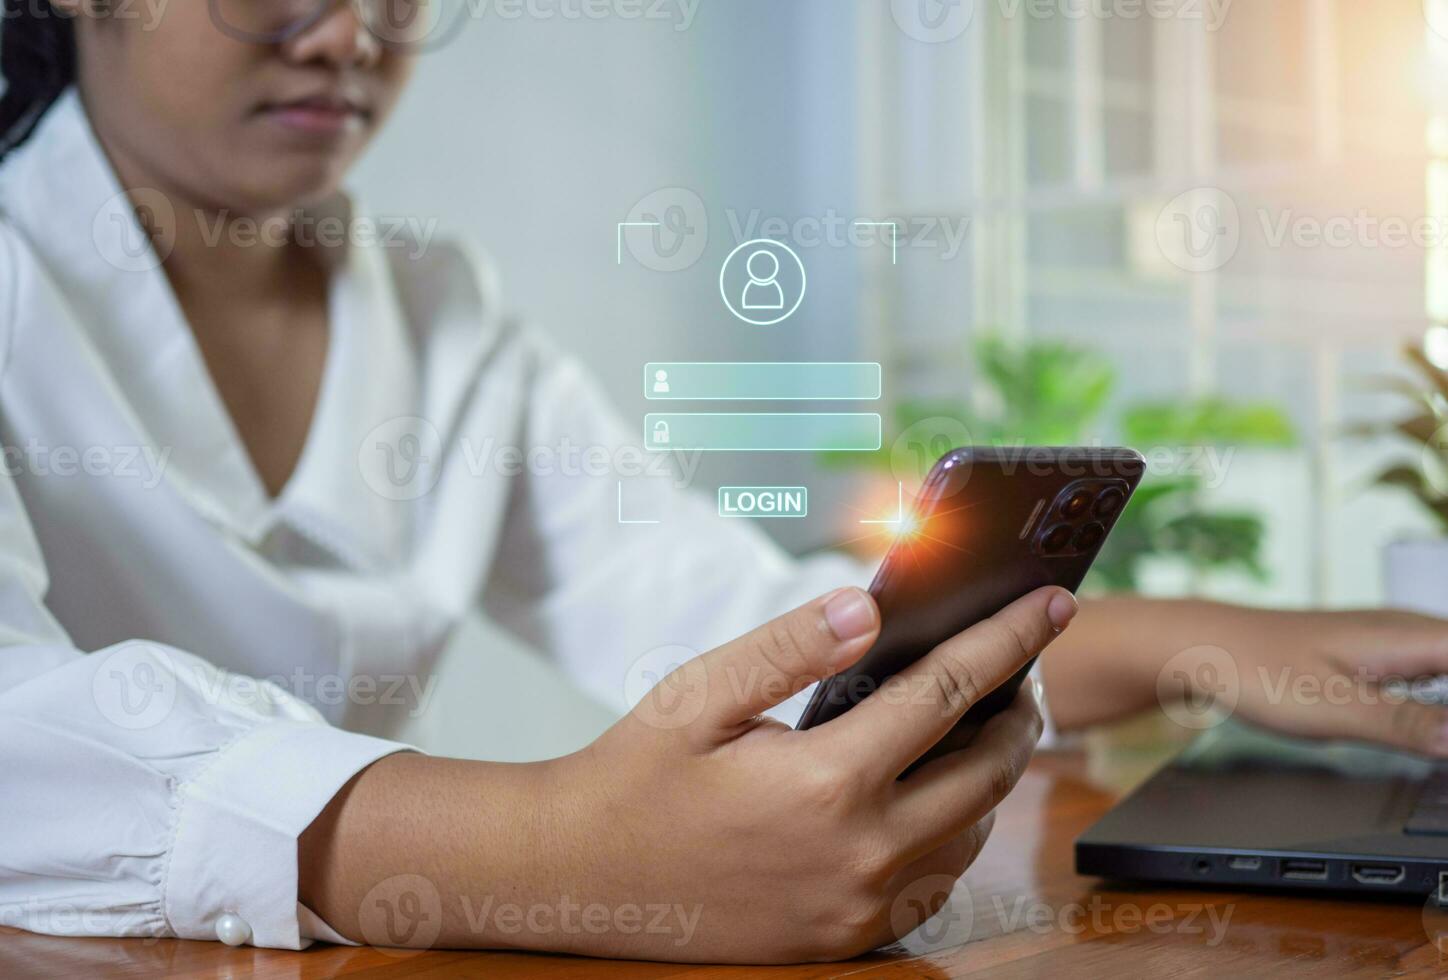 Human looking at phone screen with login screen. Represents code protection. The concept of protection against code, viruses, firmware and malware. photo